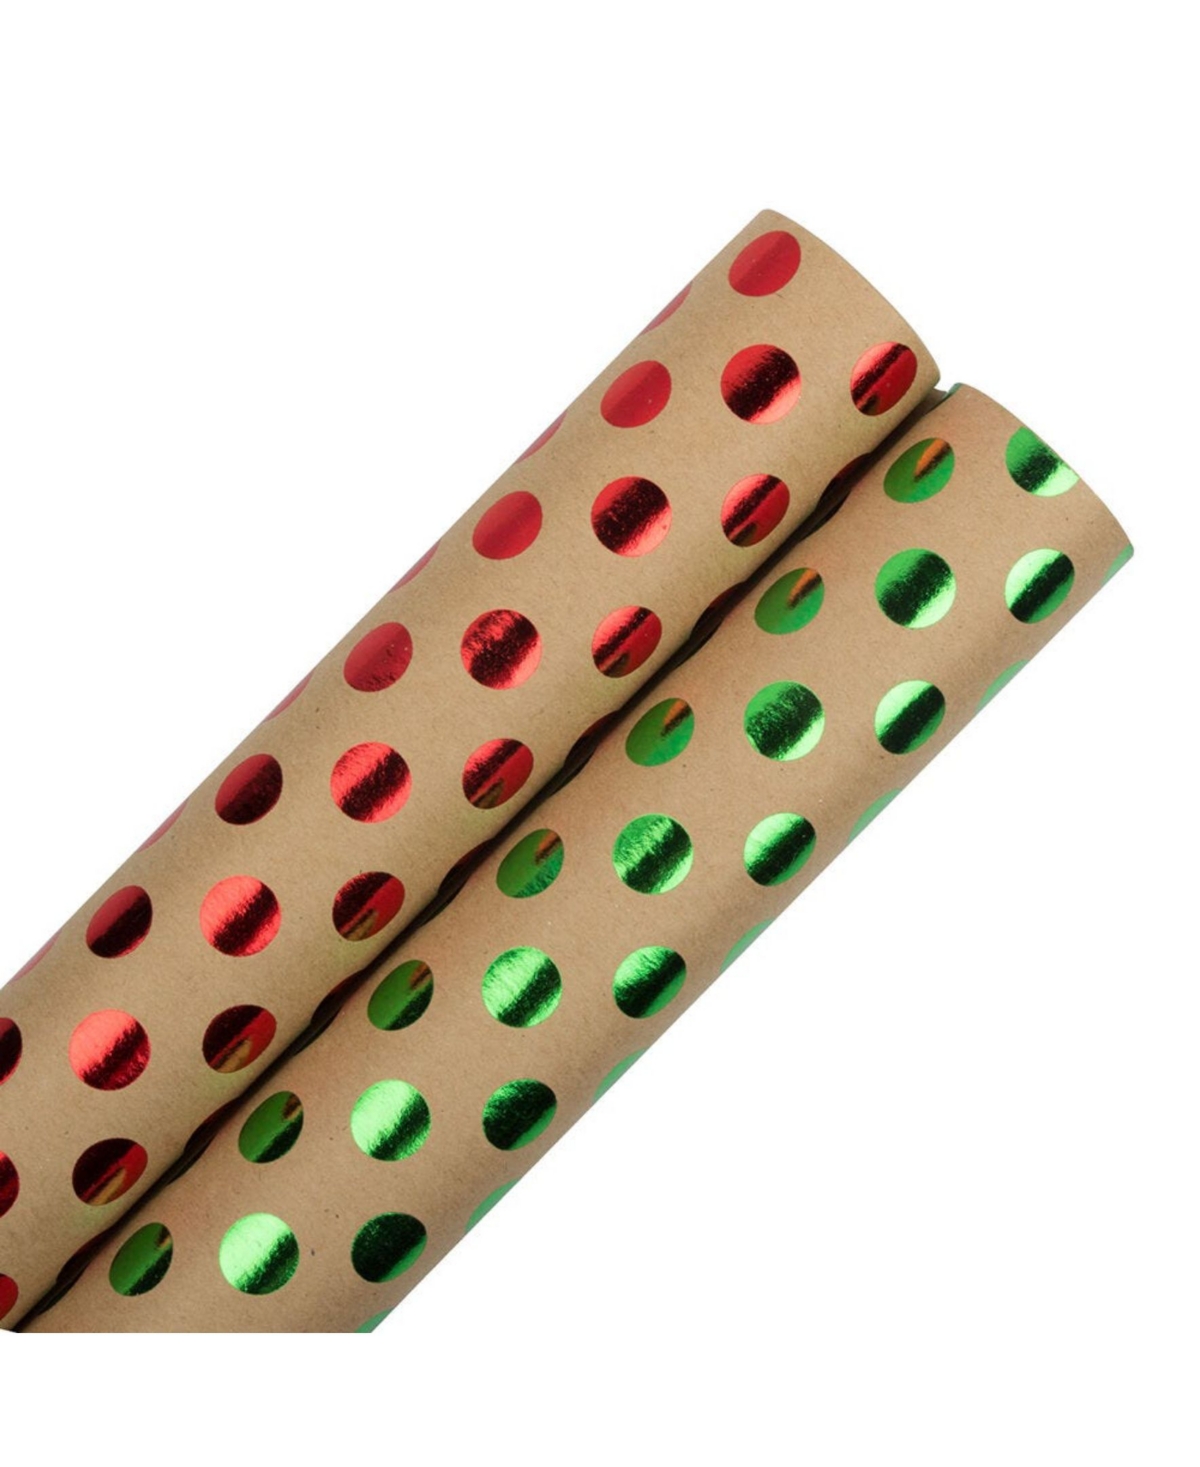 Assorted GiFoot Wrap - Kraft Wrapping Paper - 50 Square Foot Total - Dots Kraft Paper - 2 Rolls Per Pack - Red Green Dots Kraft